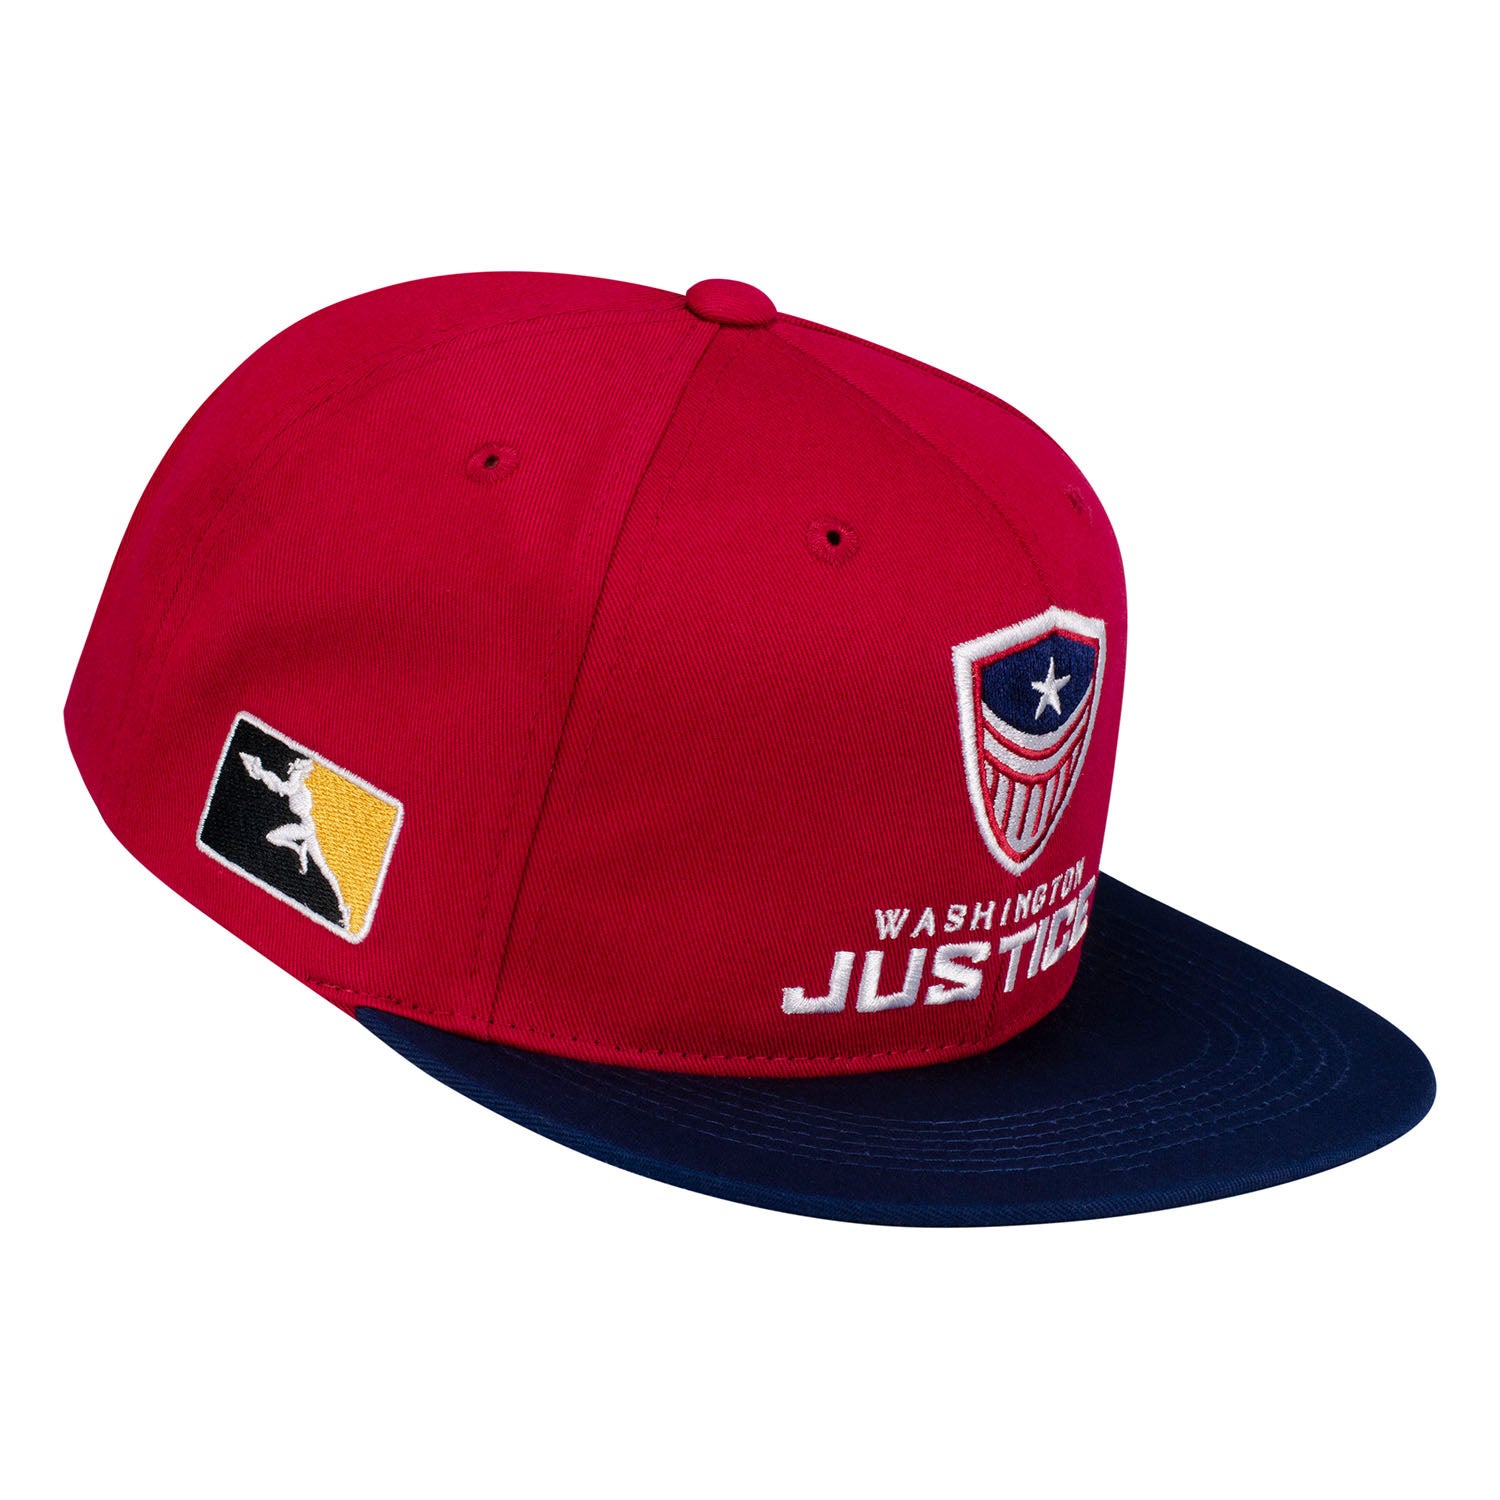 Washington Justice Red Snapback Hat - Right View